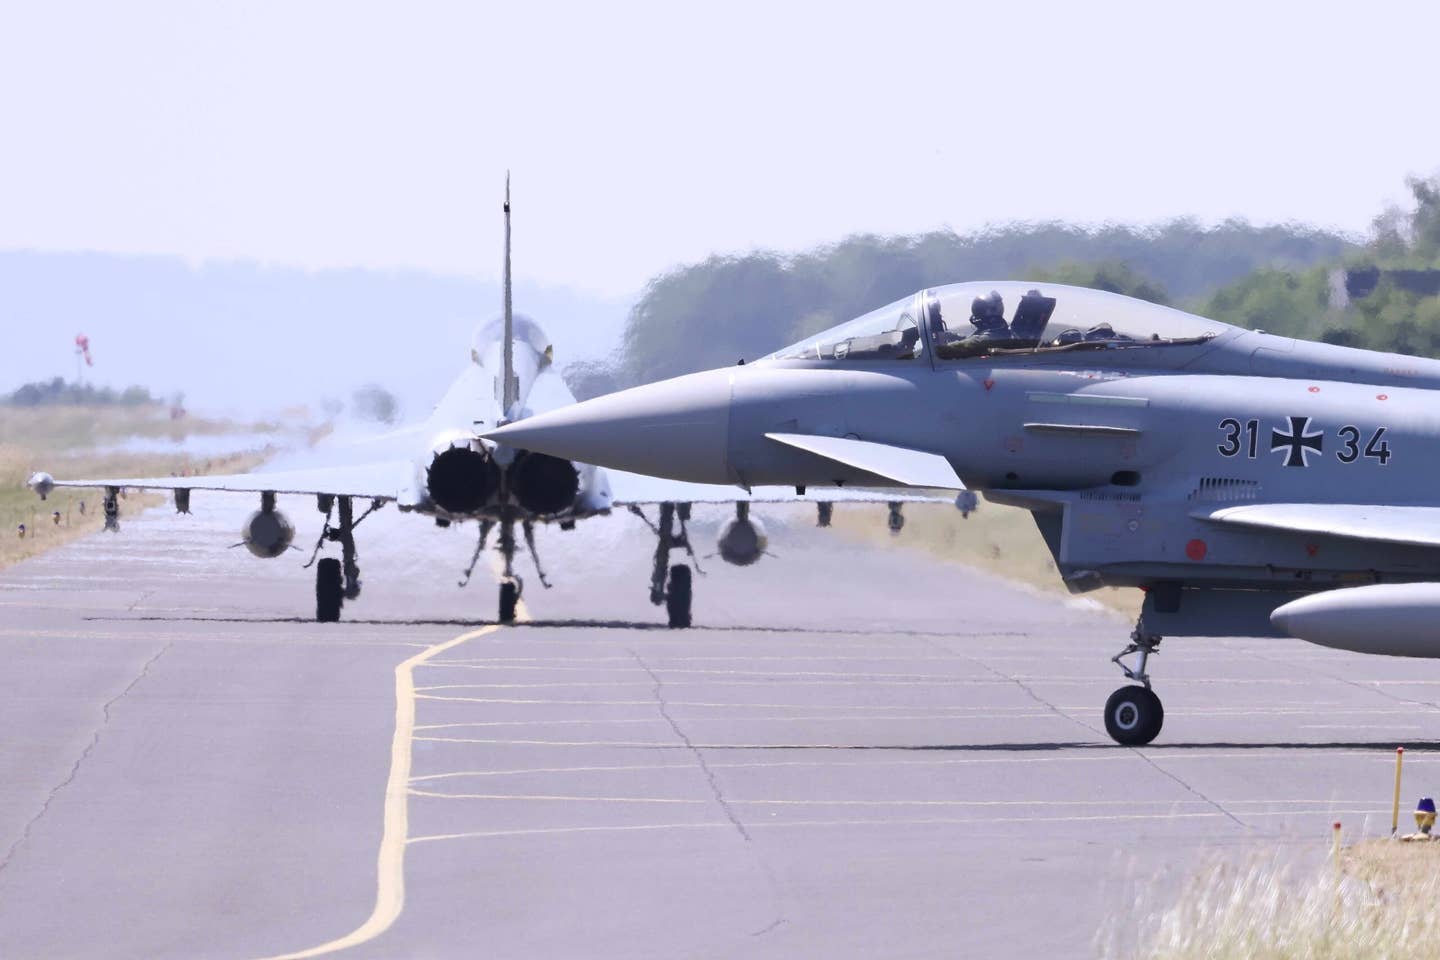 13 June 2023, North Rhine-Westphalia, Nörvenich: German Air Force Eurofighter fighter jets taxi to the runway at the Oswald Boelcke Barracks air base as part of the "Air Defender 2023" military exercise. <em>Photo by David Young/picture alliance via Getty Images</em>